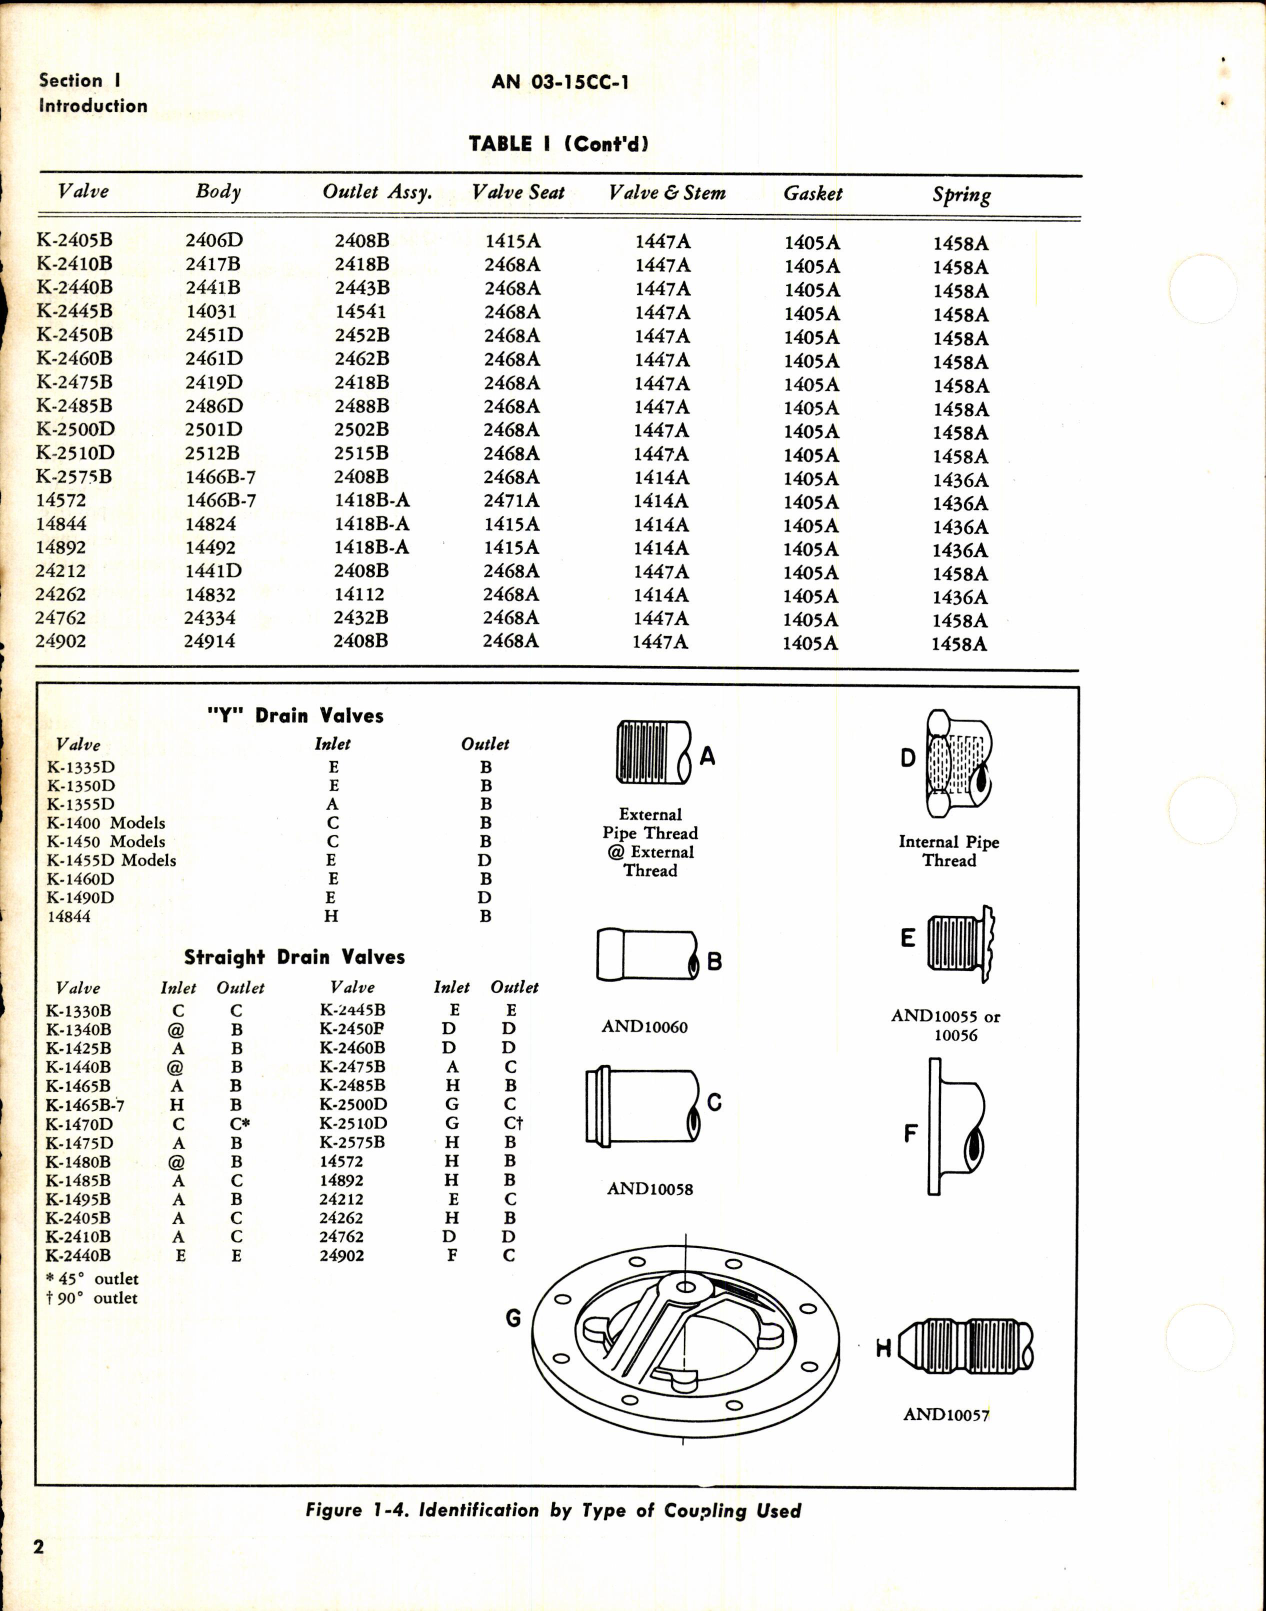 Sample page 4 from AirCorps Library document: Overhaul Instructions for Y Drain, Straight Drain & Defuling Valves